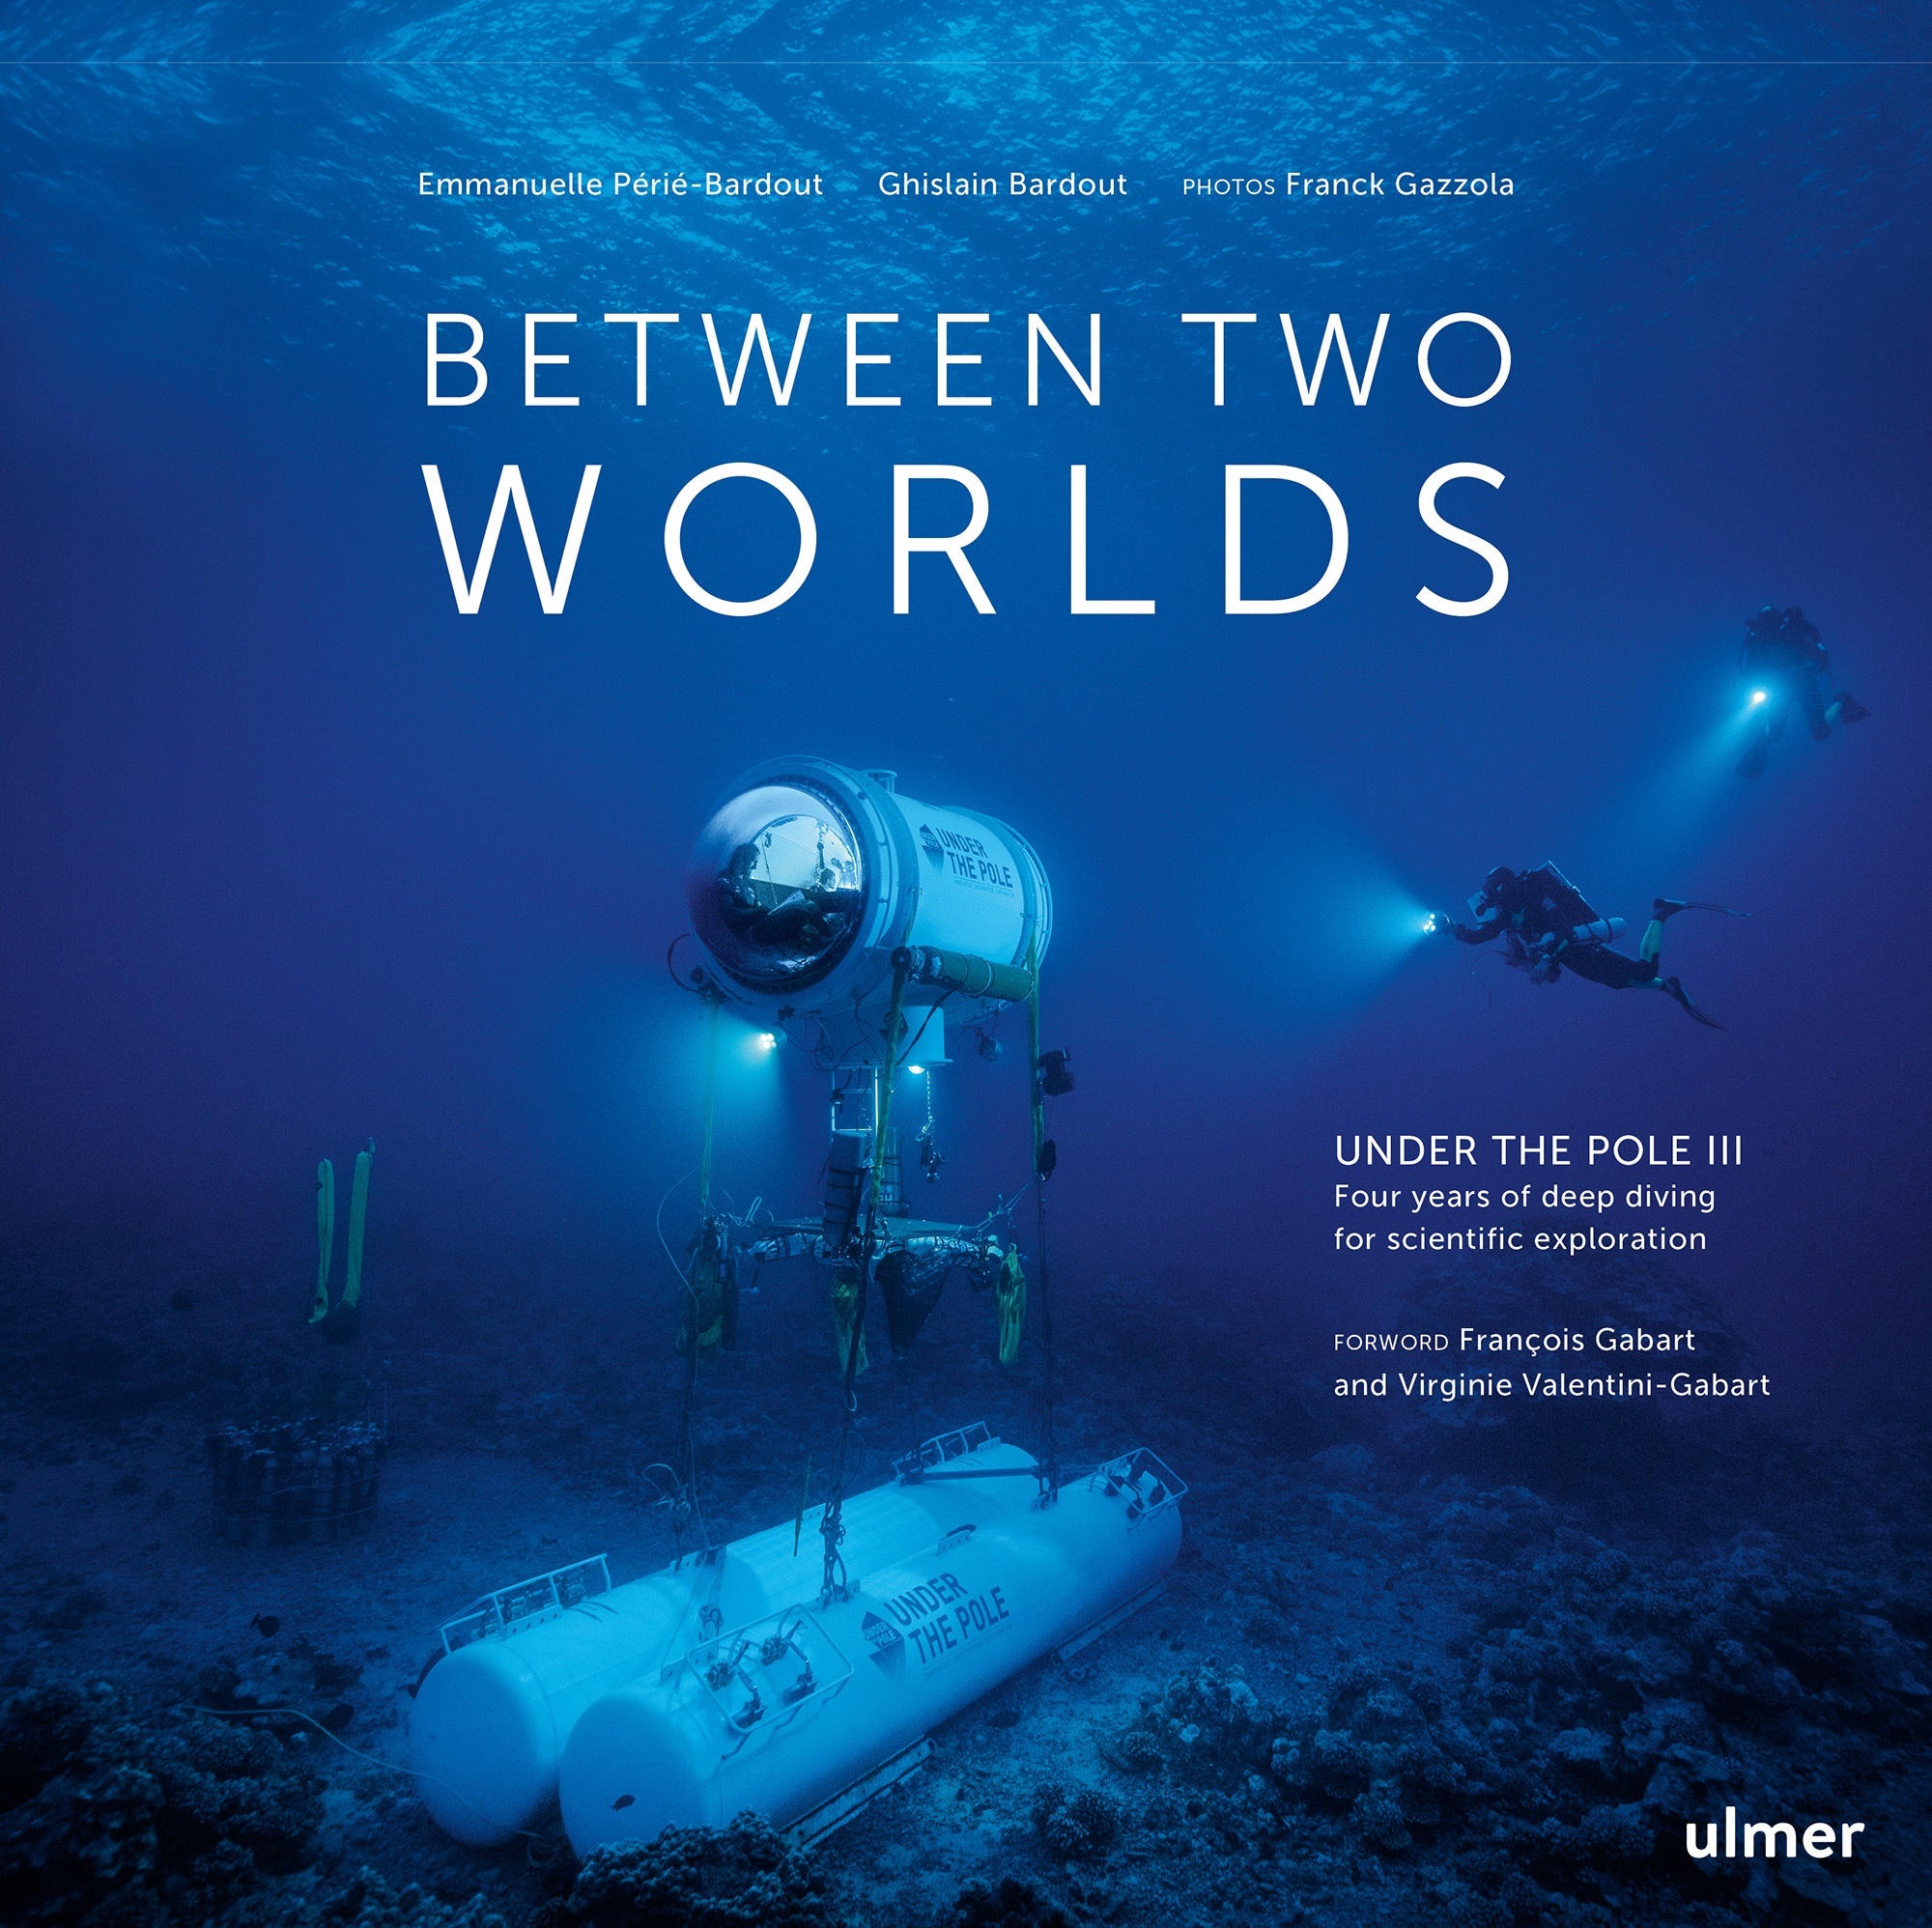 Between two worlds "Under the Pole III. Four years of deep diving for scientific exploration"